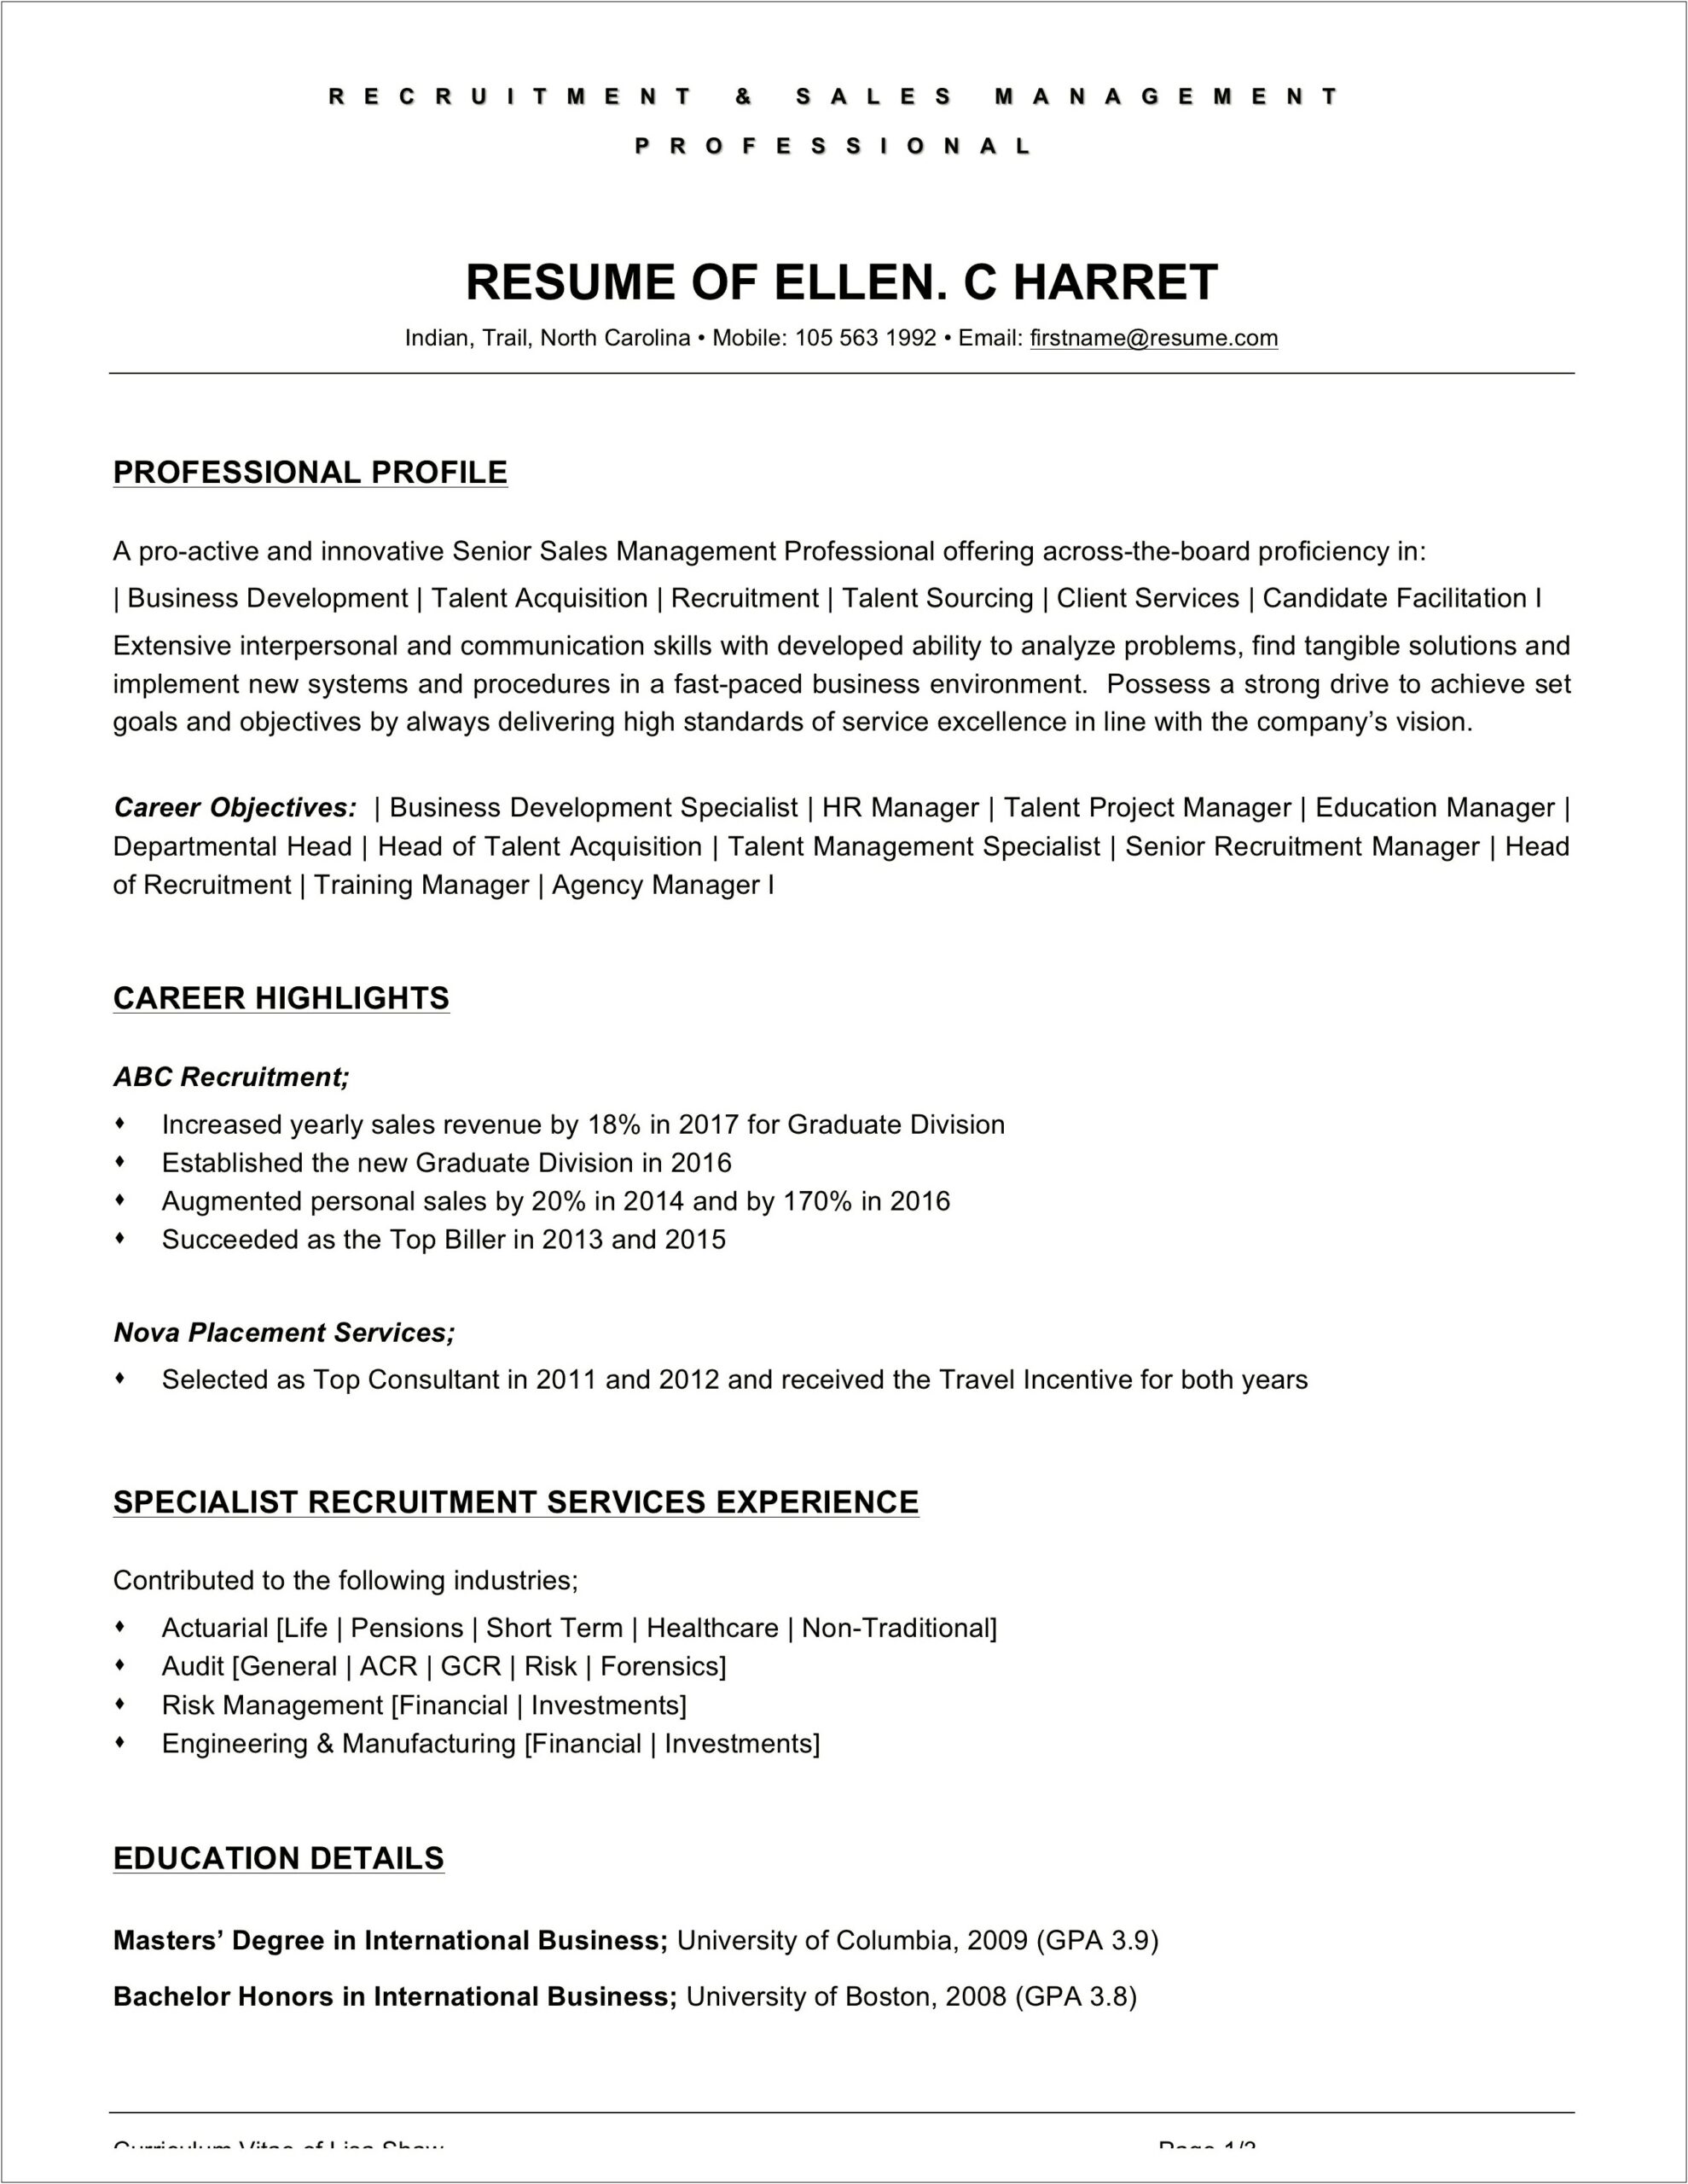 Free Sample Resume For Hotel Industry